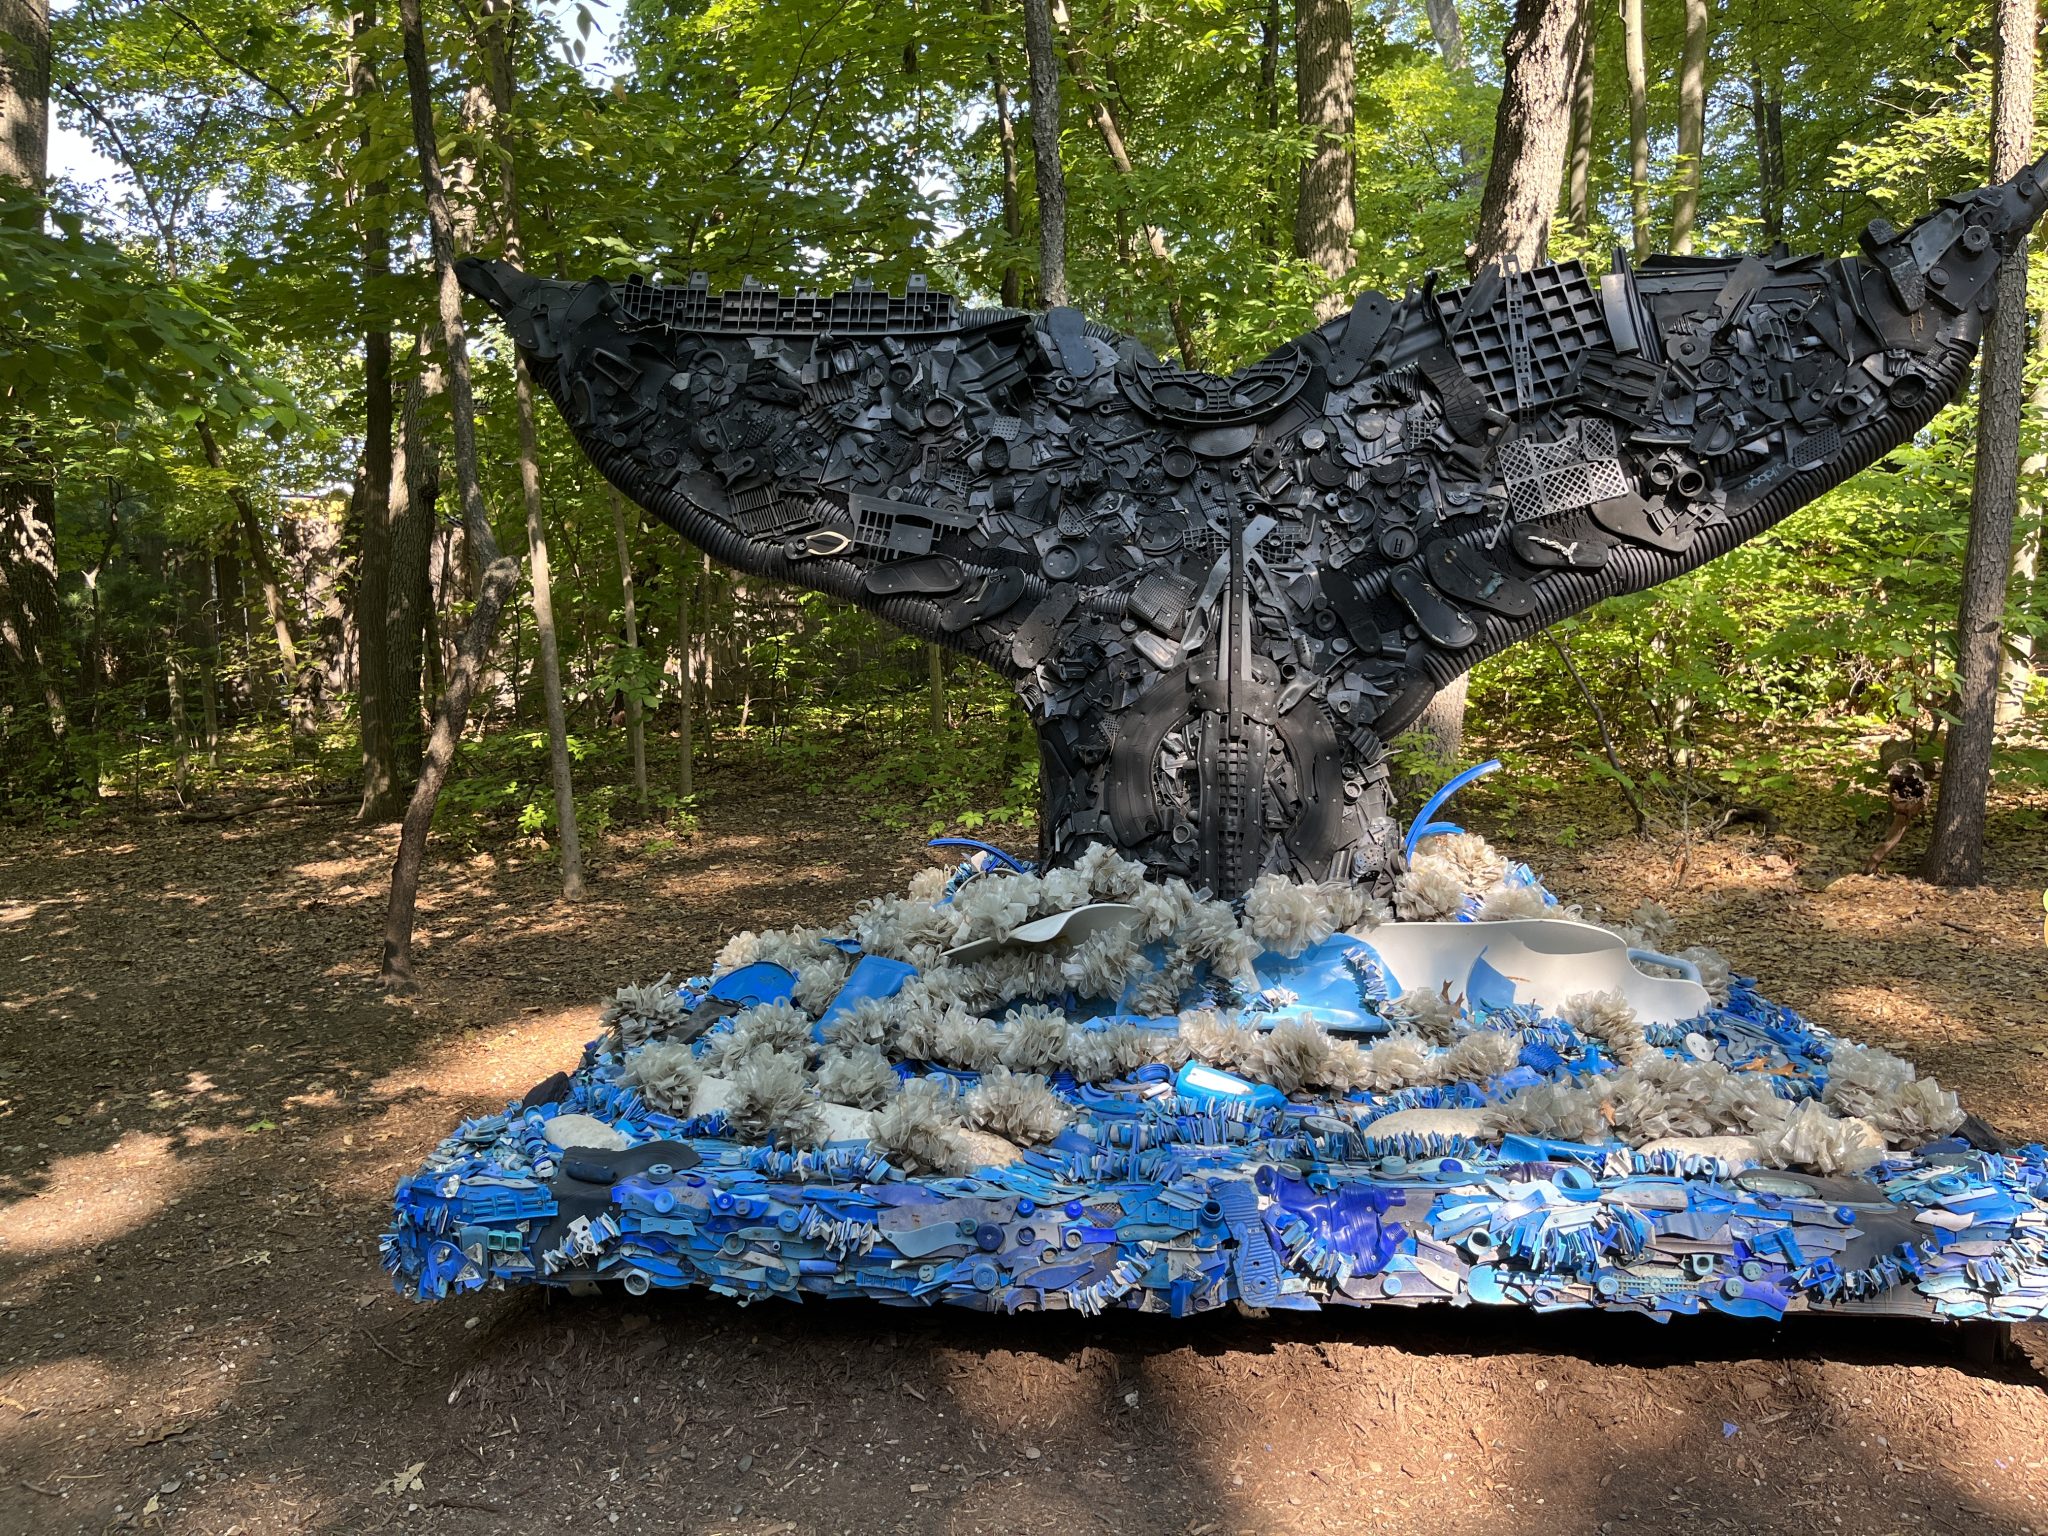 Whale tail made entirely from trash.